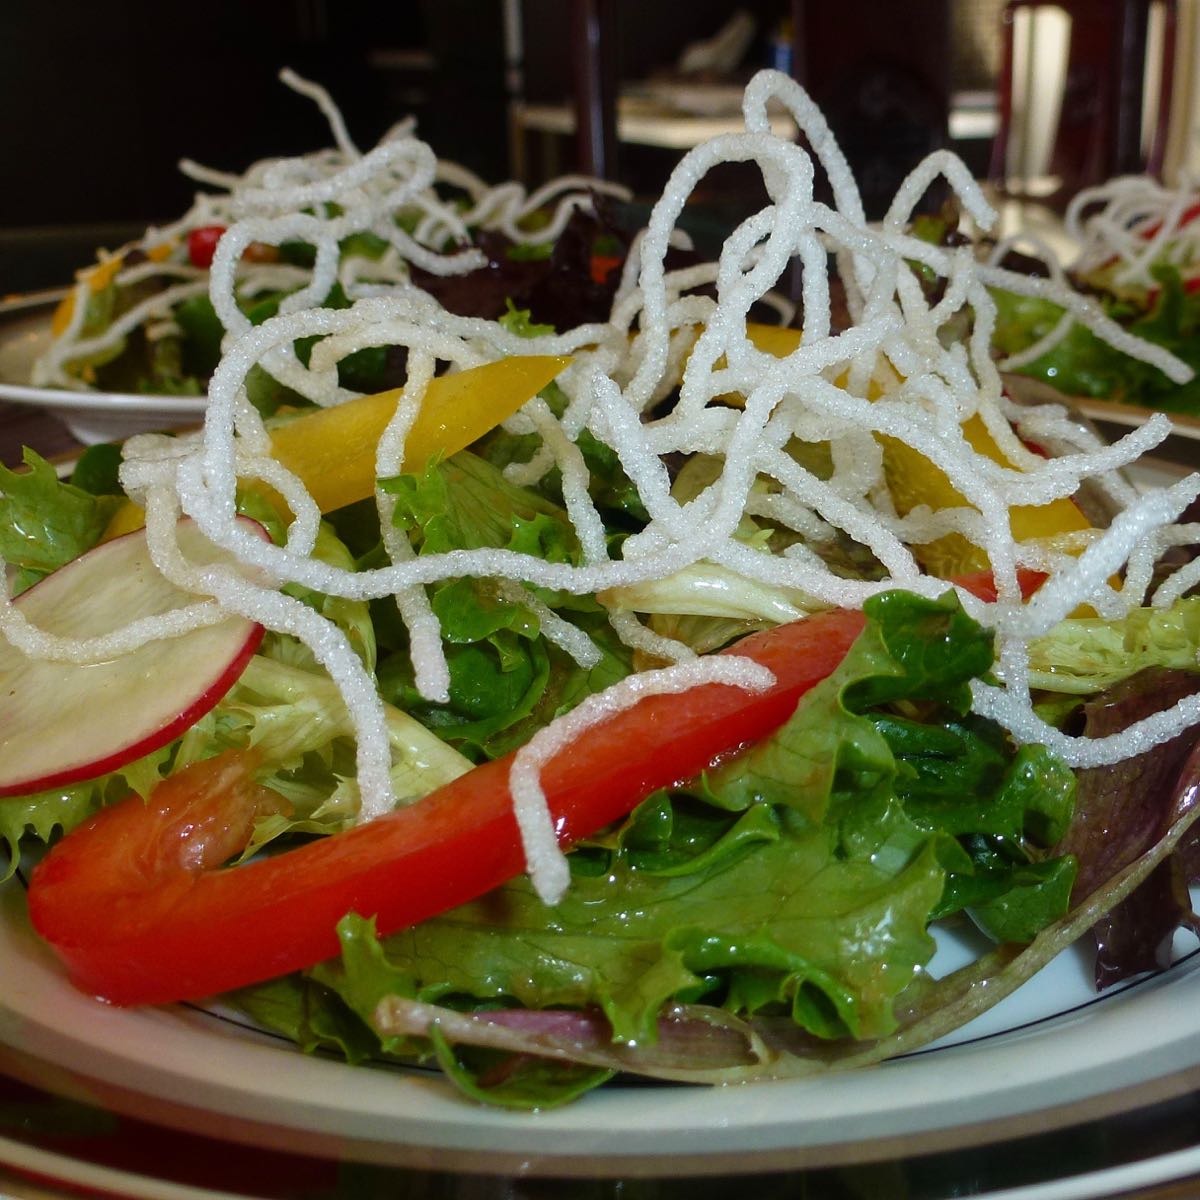 A plate of garden greens with Asian Dressing garnished with Crispy Bean Thread Noodles.